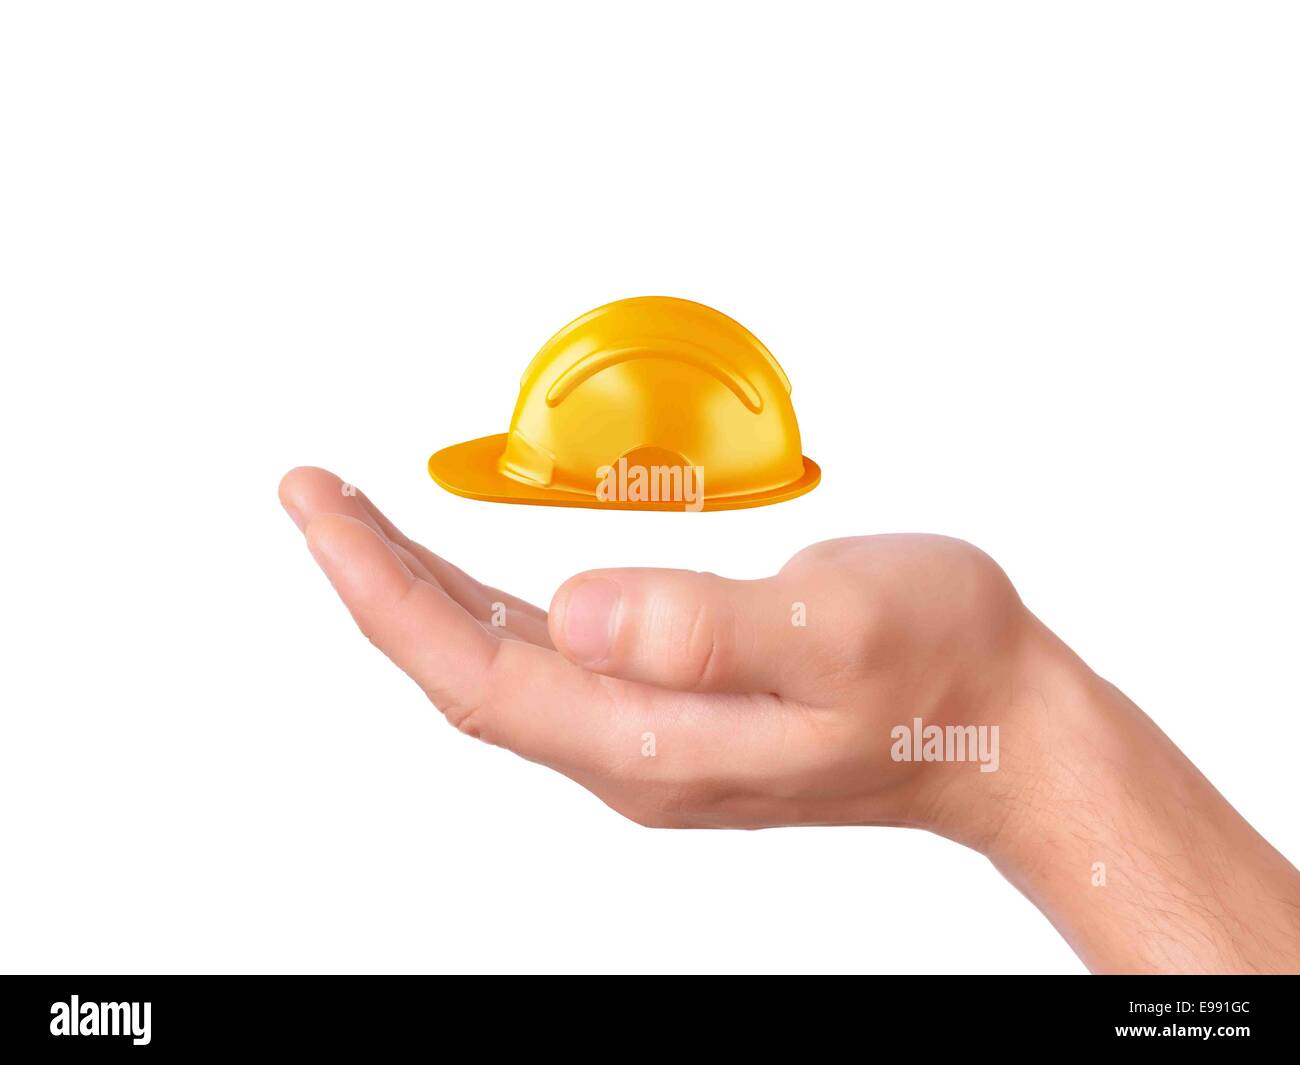 image of hand holding 3d Construction safety Helmet on white background Stock Photo